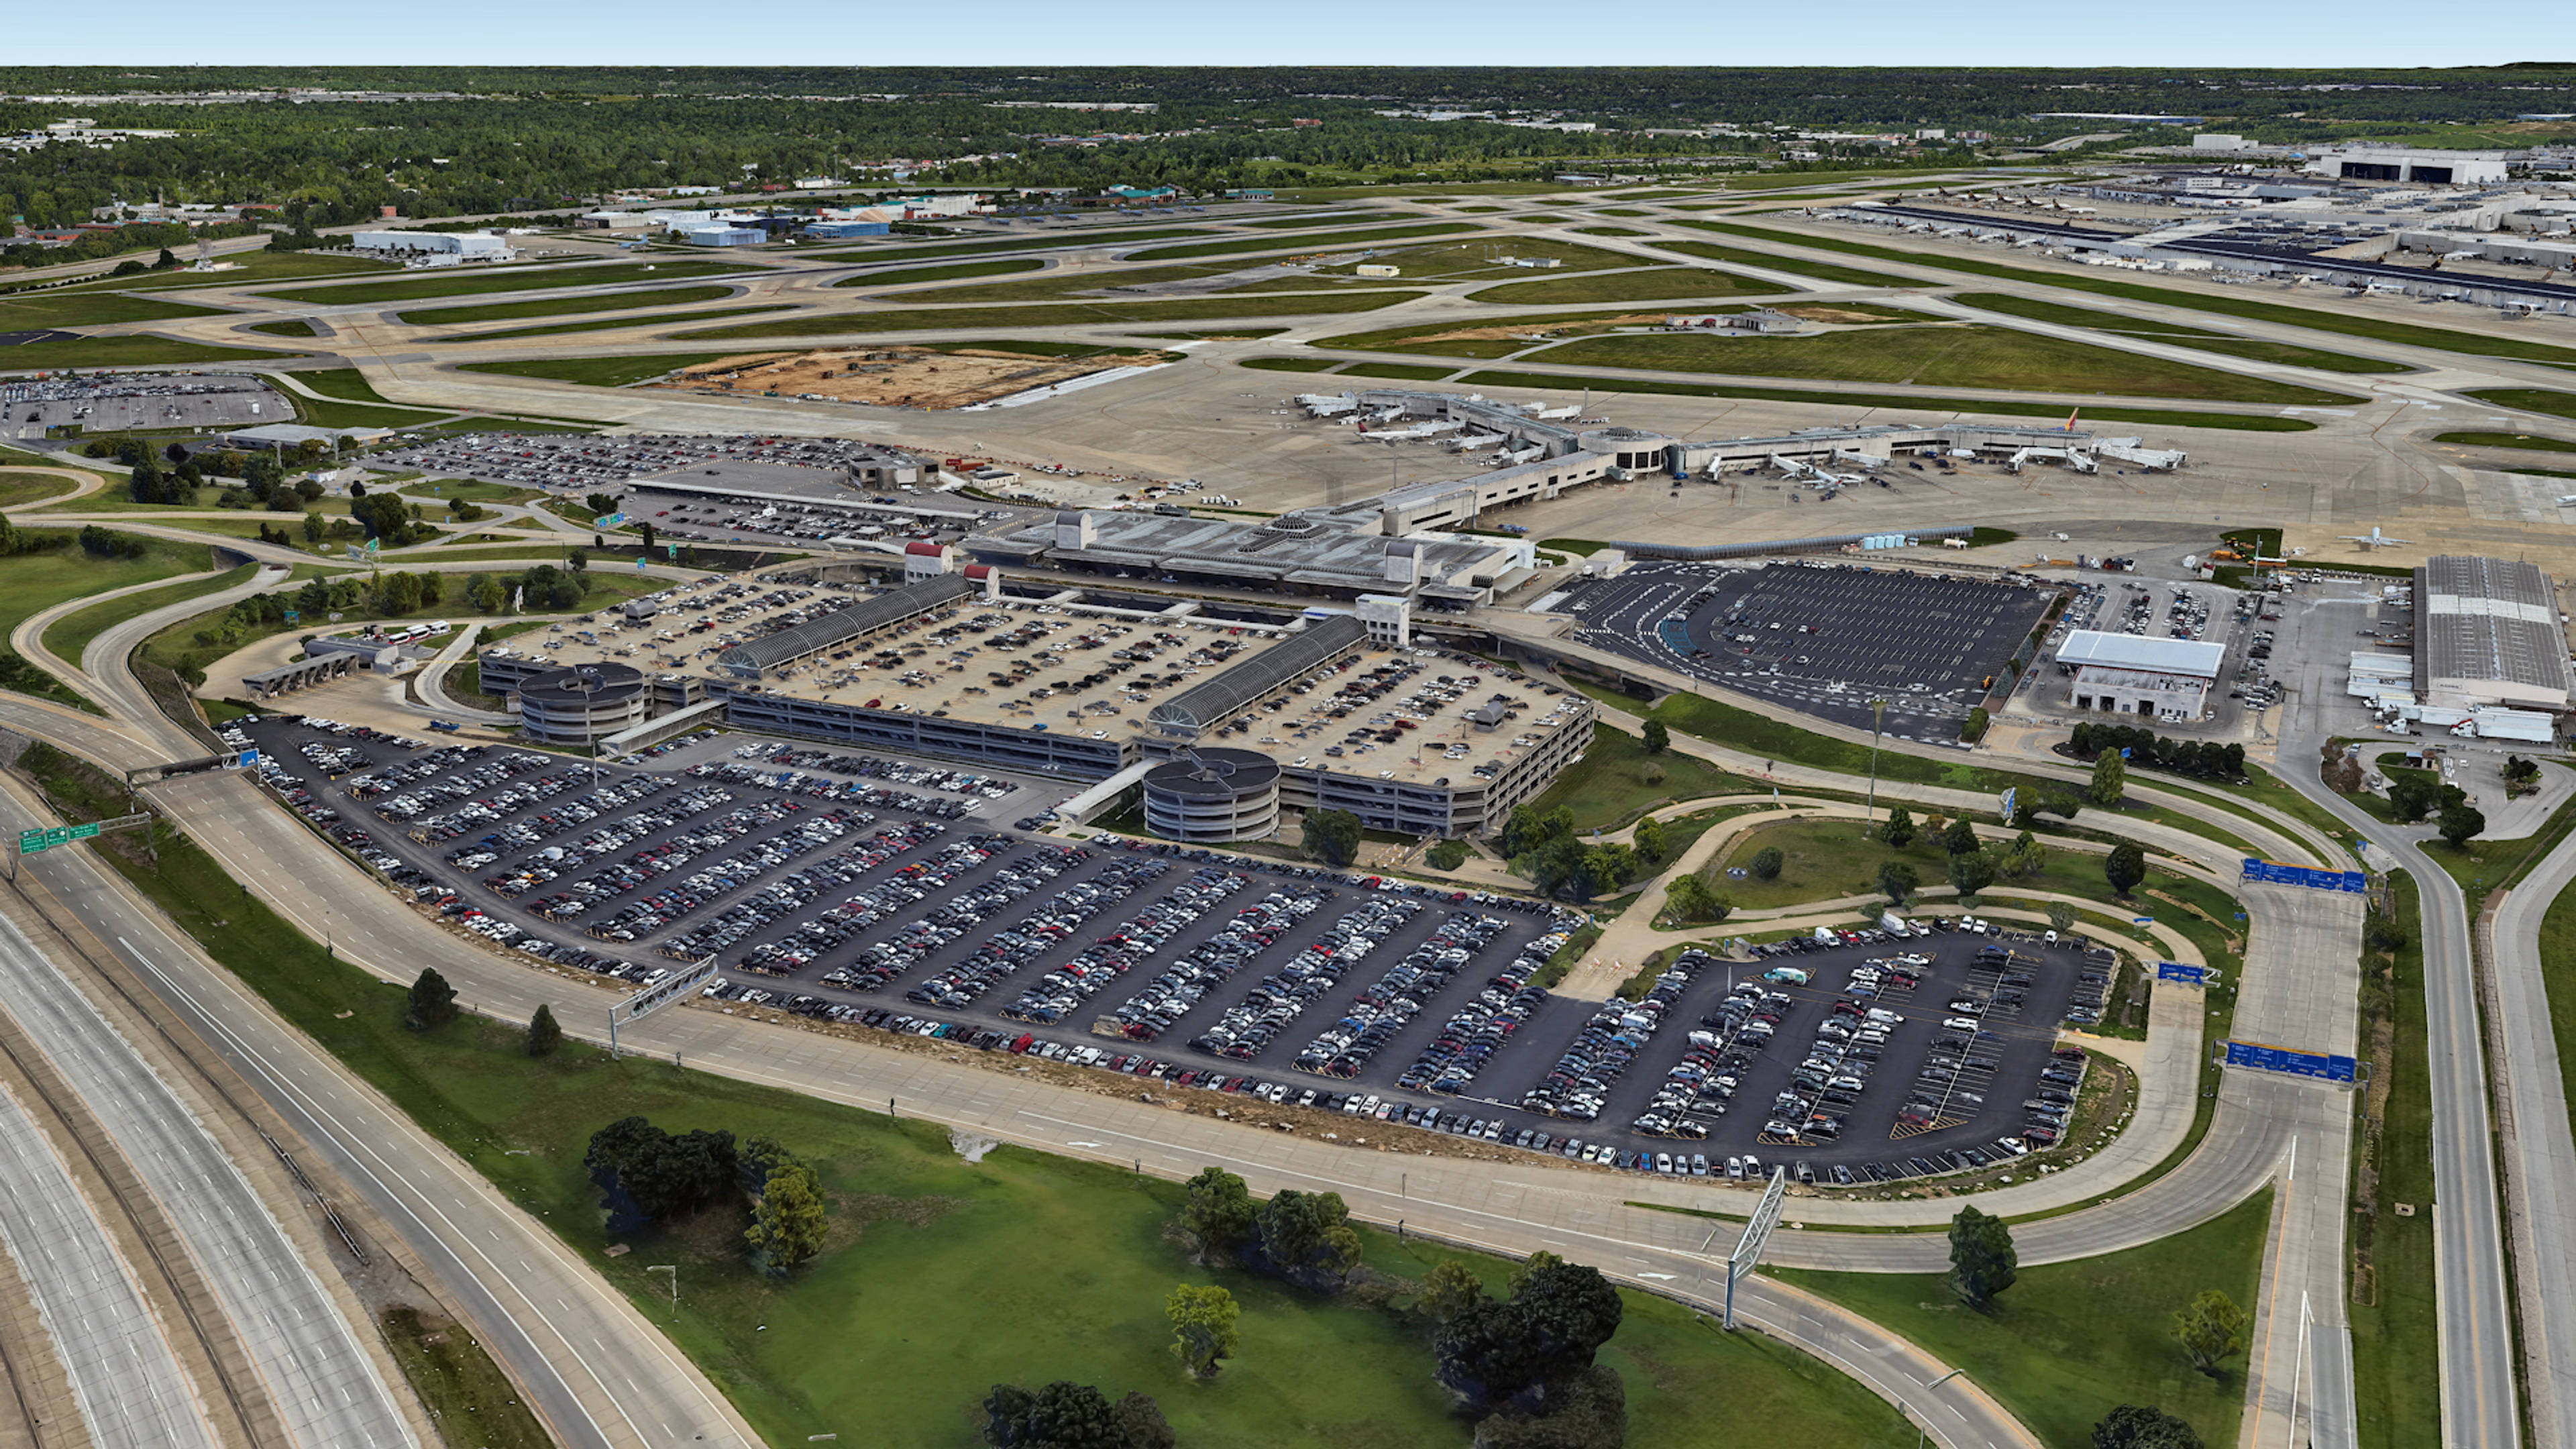 Aerial View of Louisville Airport Parking